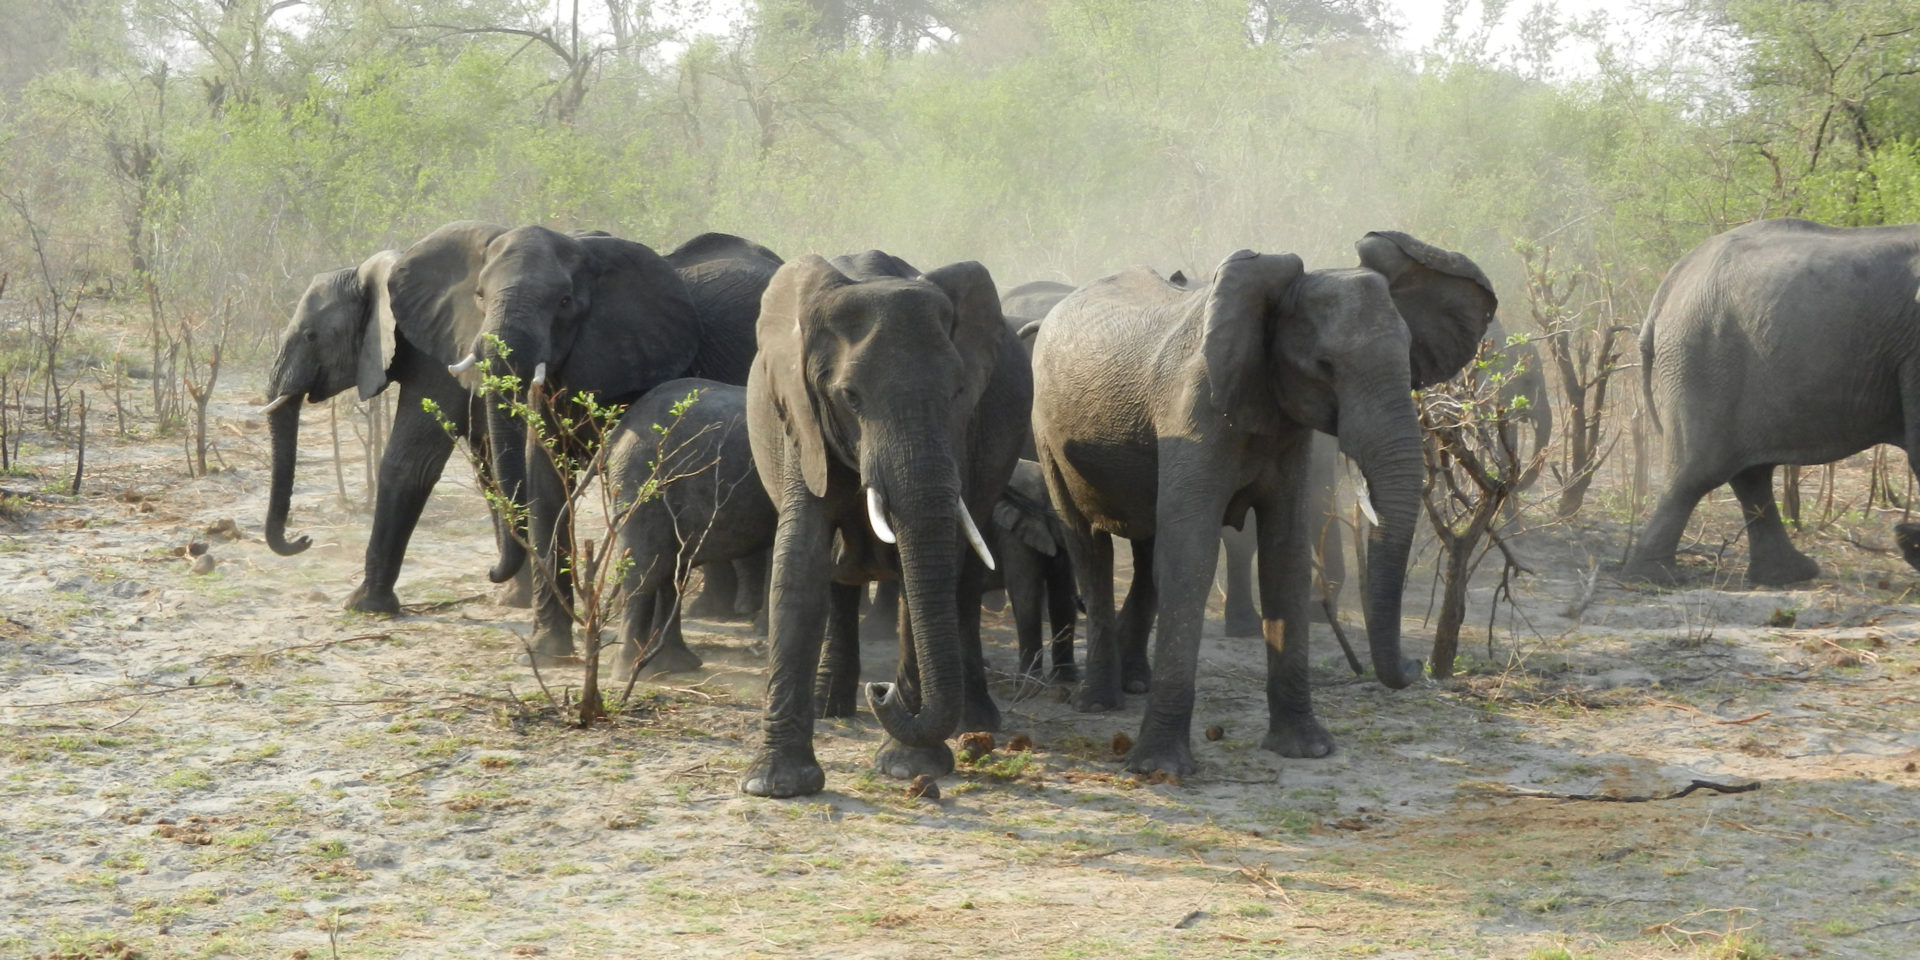 A large group of adult and young elephants bunched together in a brown and green savanna.